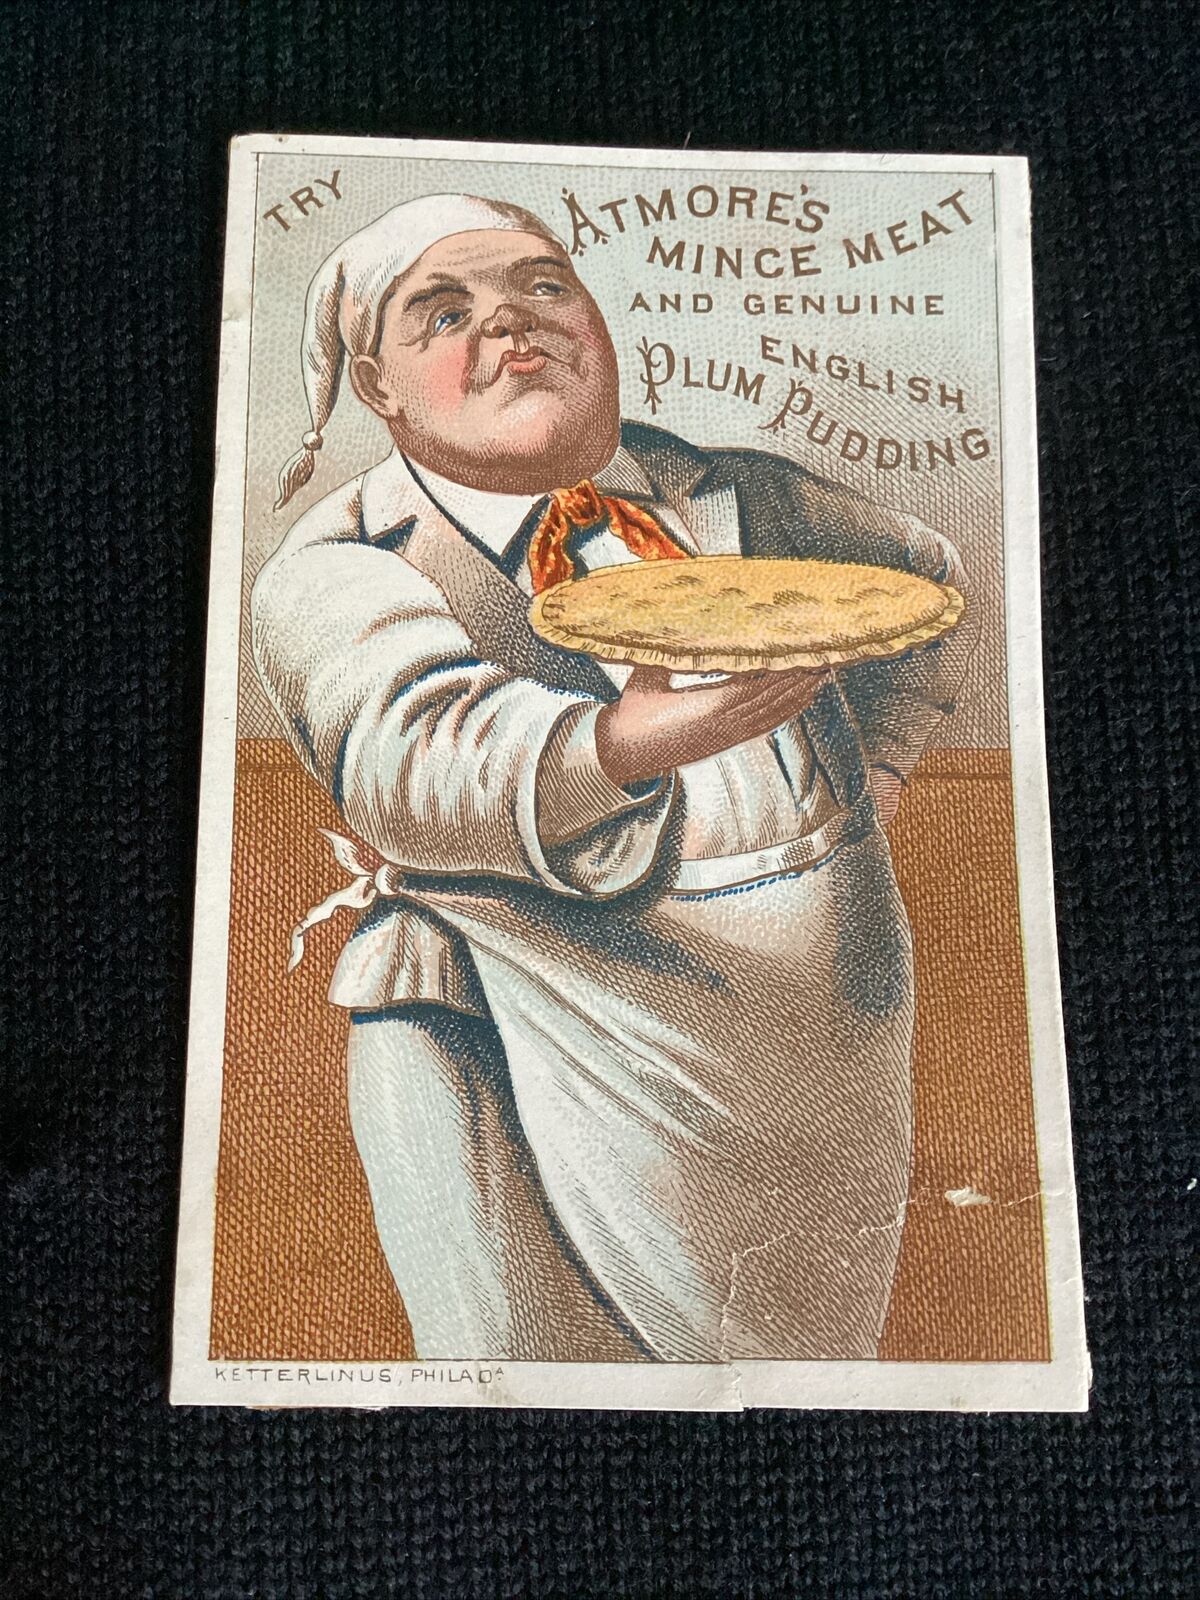 Atmore's Mince Meat trade card - Vintage - Antique - Baker Holding Pie